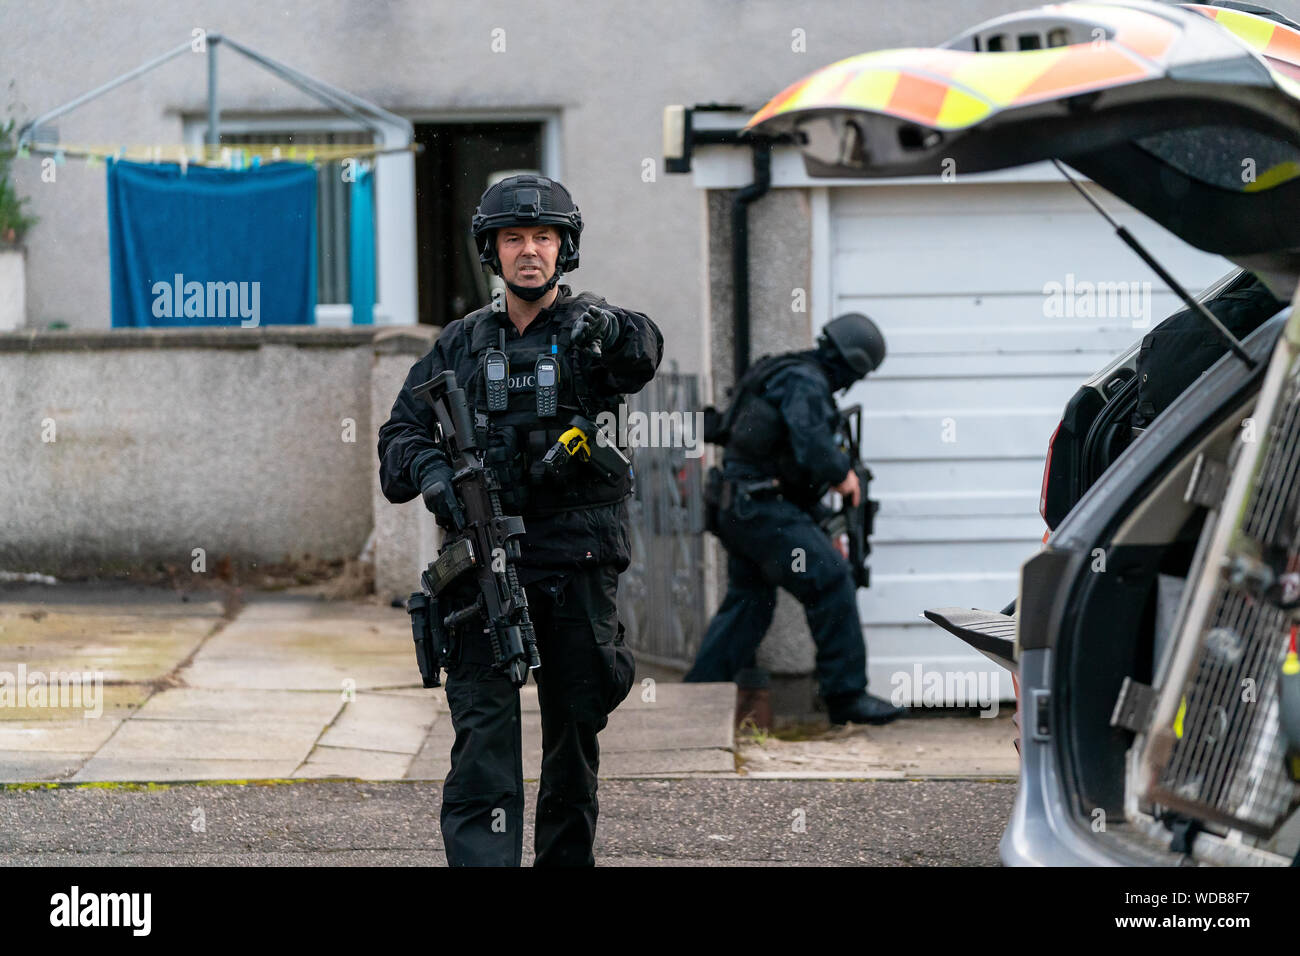 20 August 2019. Elgin, Moray, Scotland, UK. This is the scene of a Police Authorised Firearms Team conducting a raid at a house within Elgin. Stock Photo